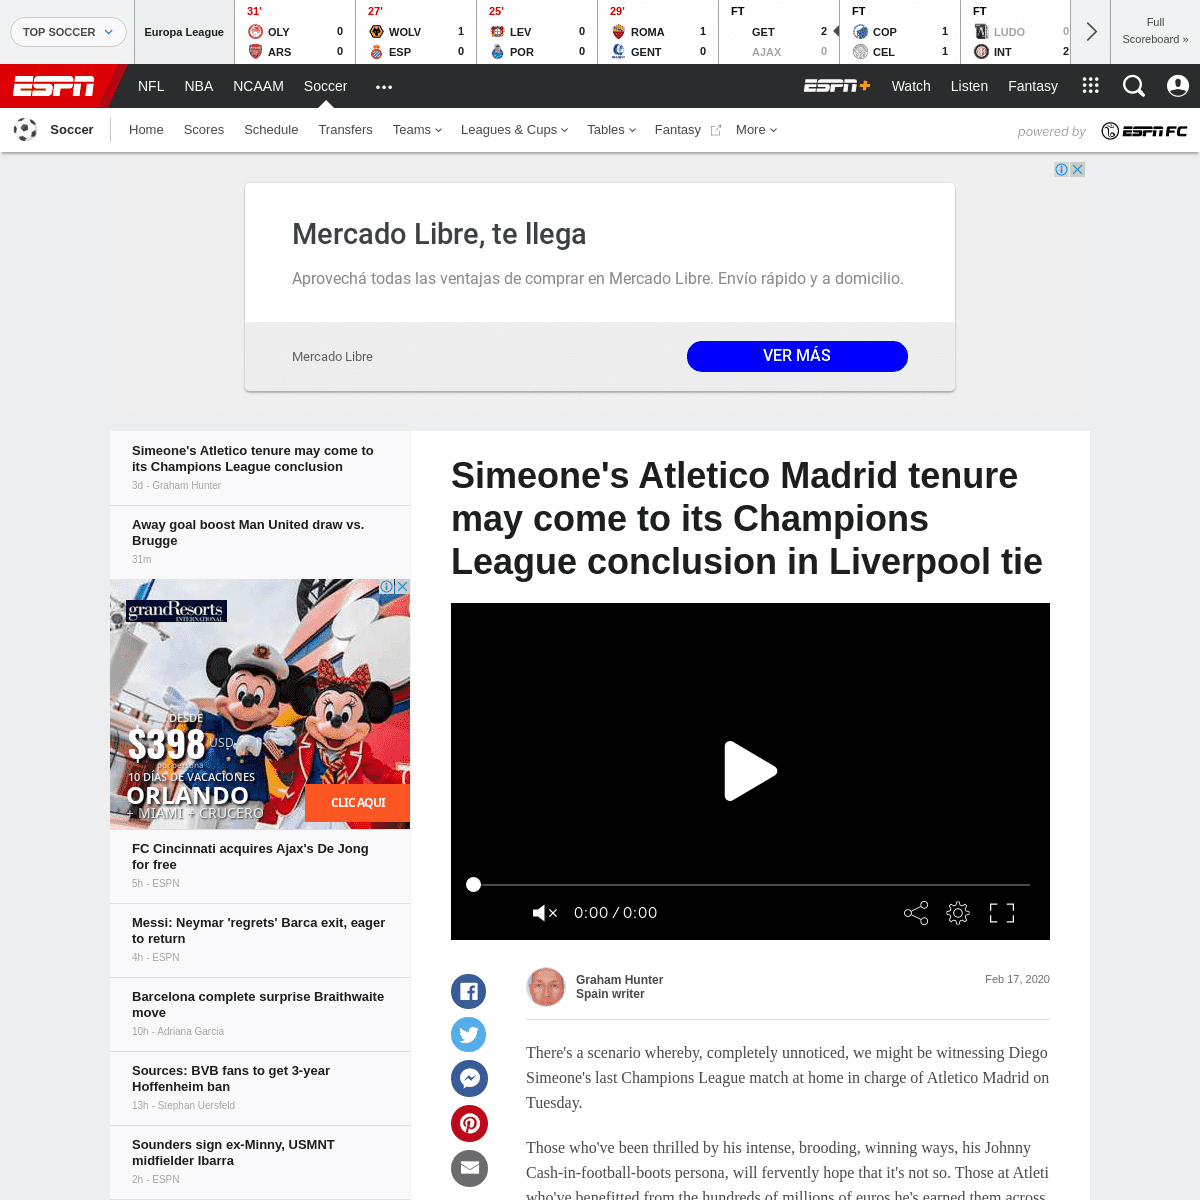 A complete backup of www.espn.com/soccer/atletico-madrid/story/4054731/simeones-atletico-madrid-tenure-may-come-to-its-champions